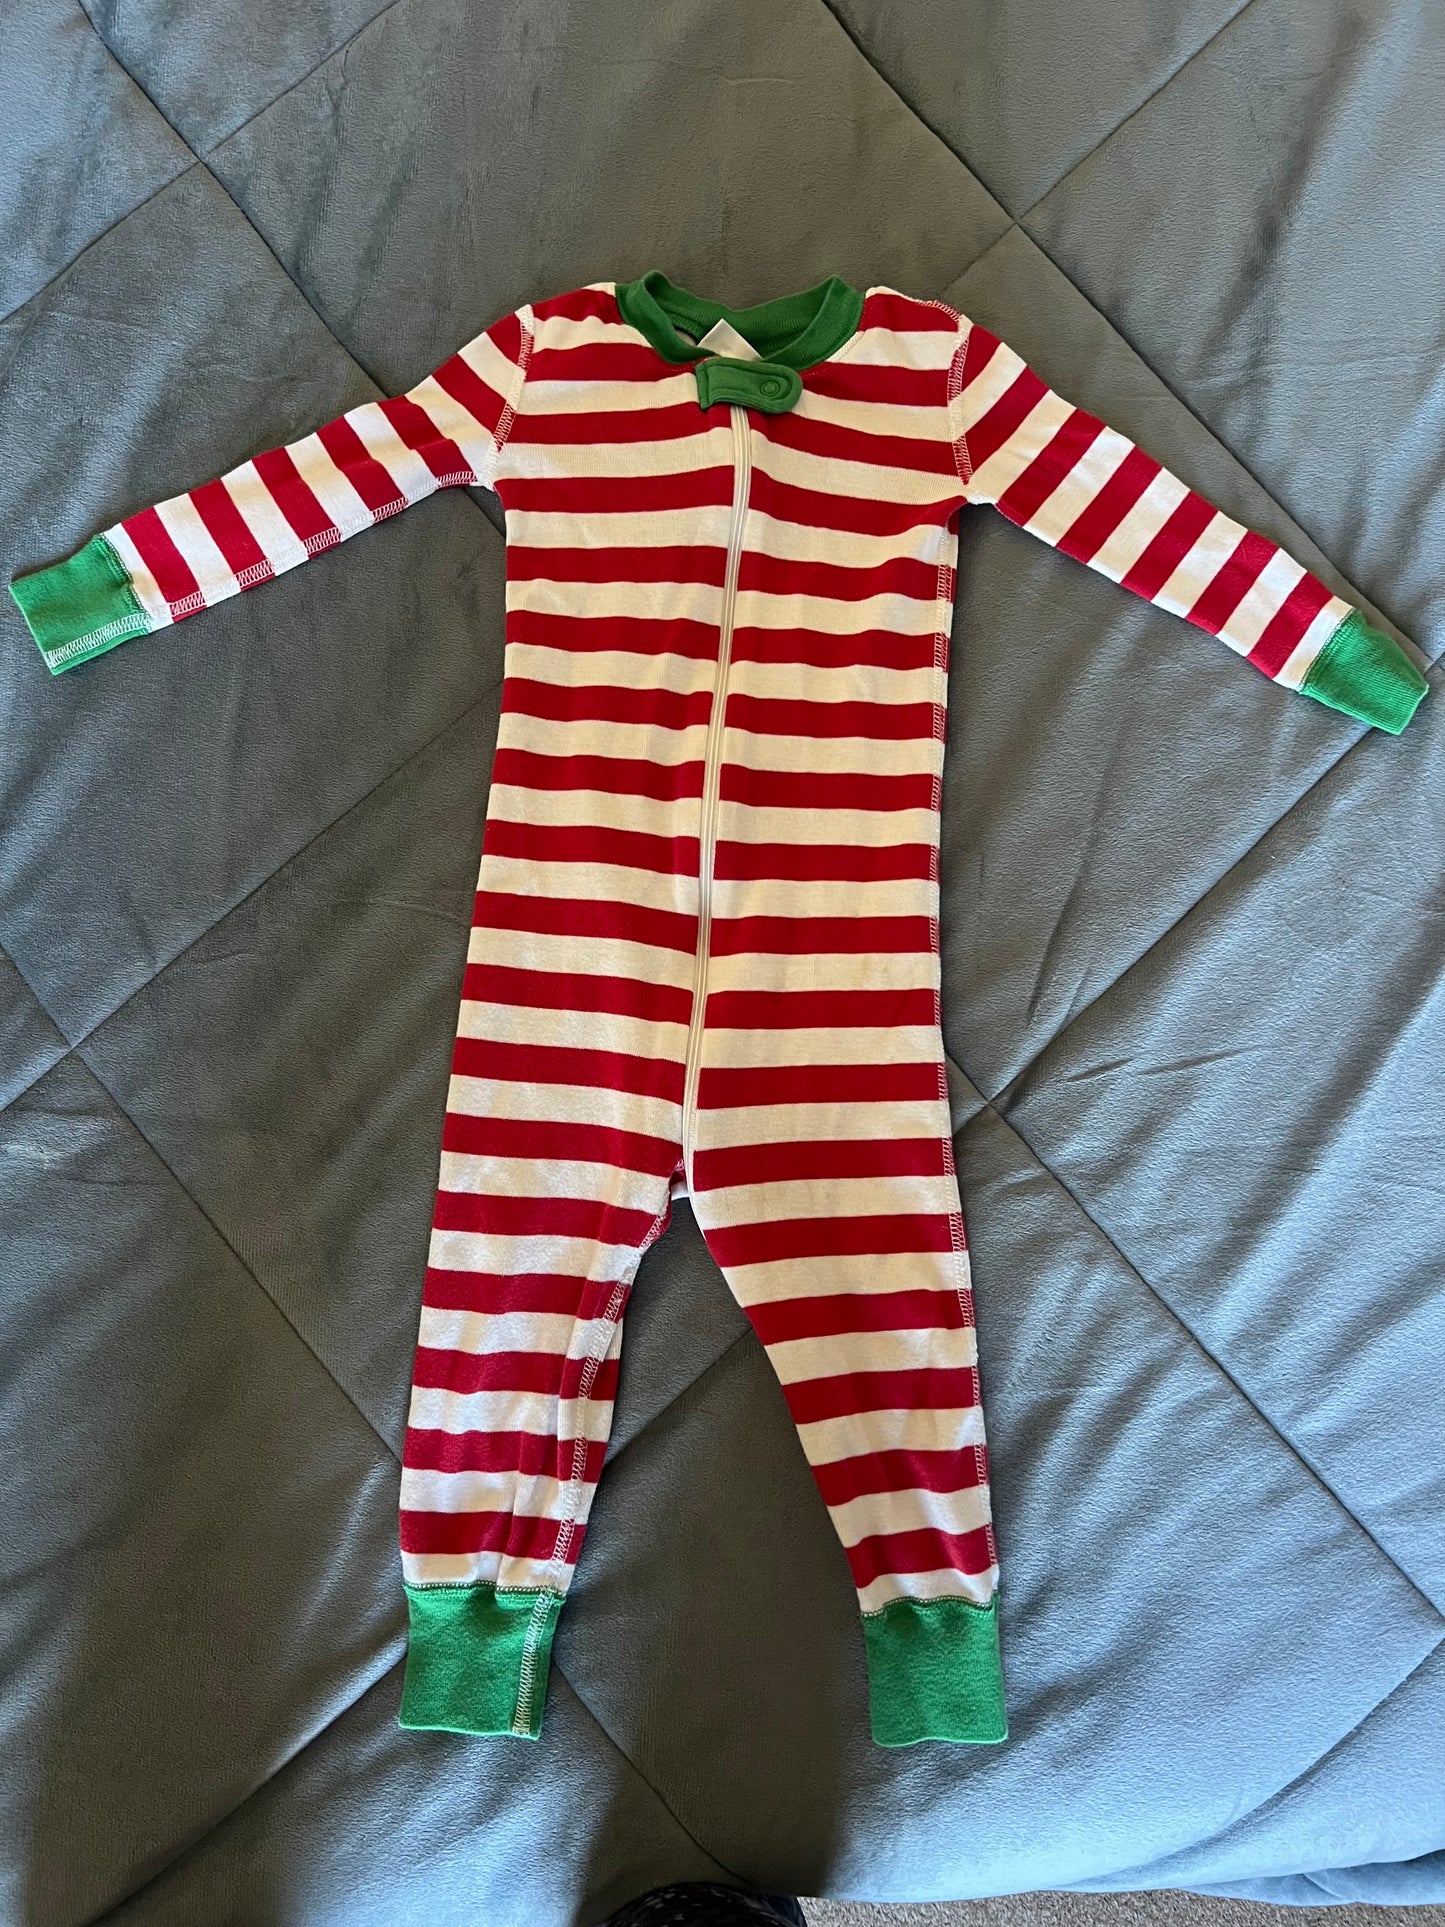 **REDUCED** Hanna Anderrson Boys or Girls Red and White Striped Longsleeve Onesie Pajamas Size 85cm / 2T